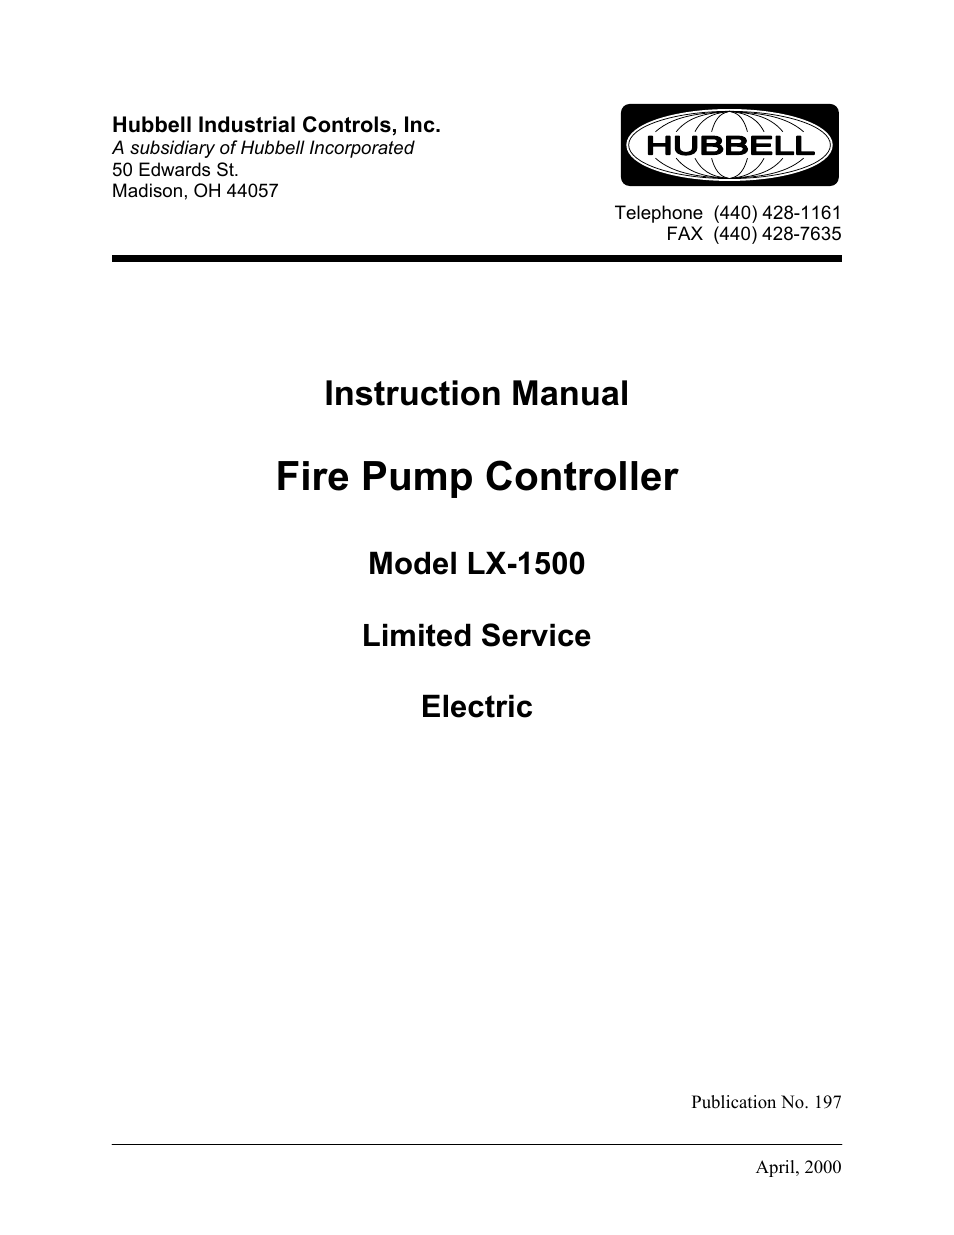 Hubbell Fire Pump Controller LX-1500 User Manual | 12 pages